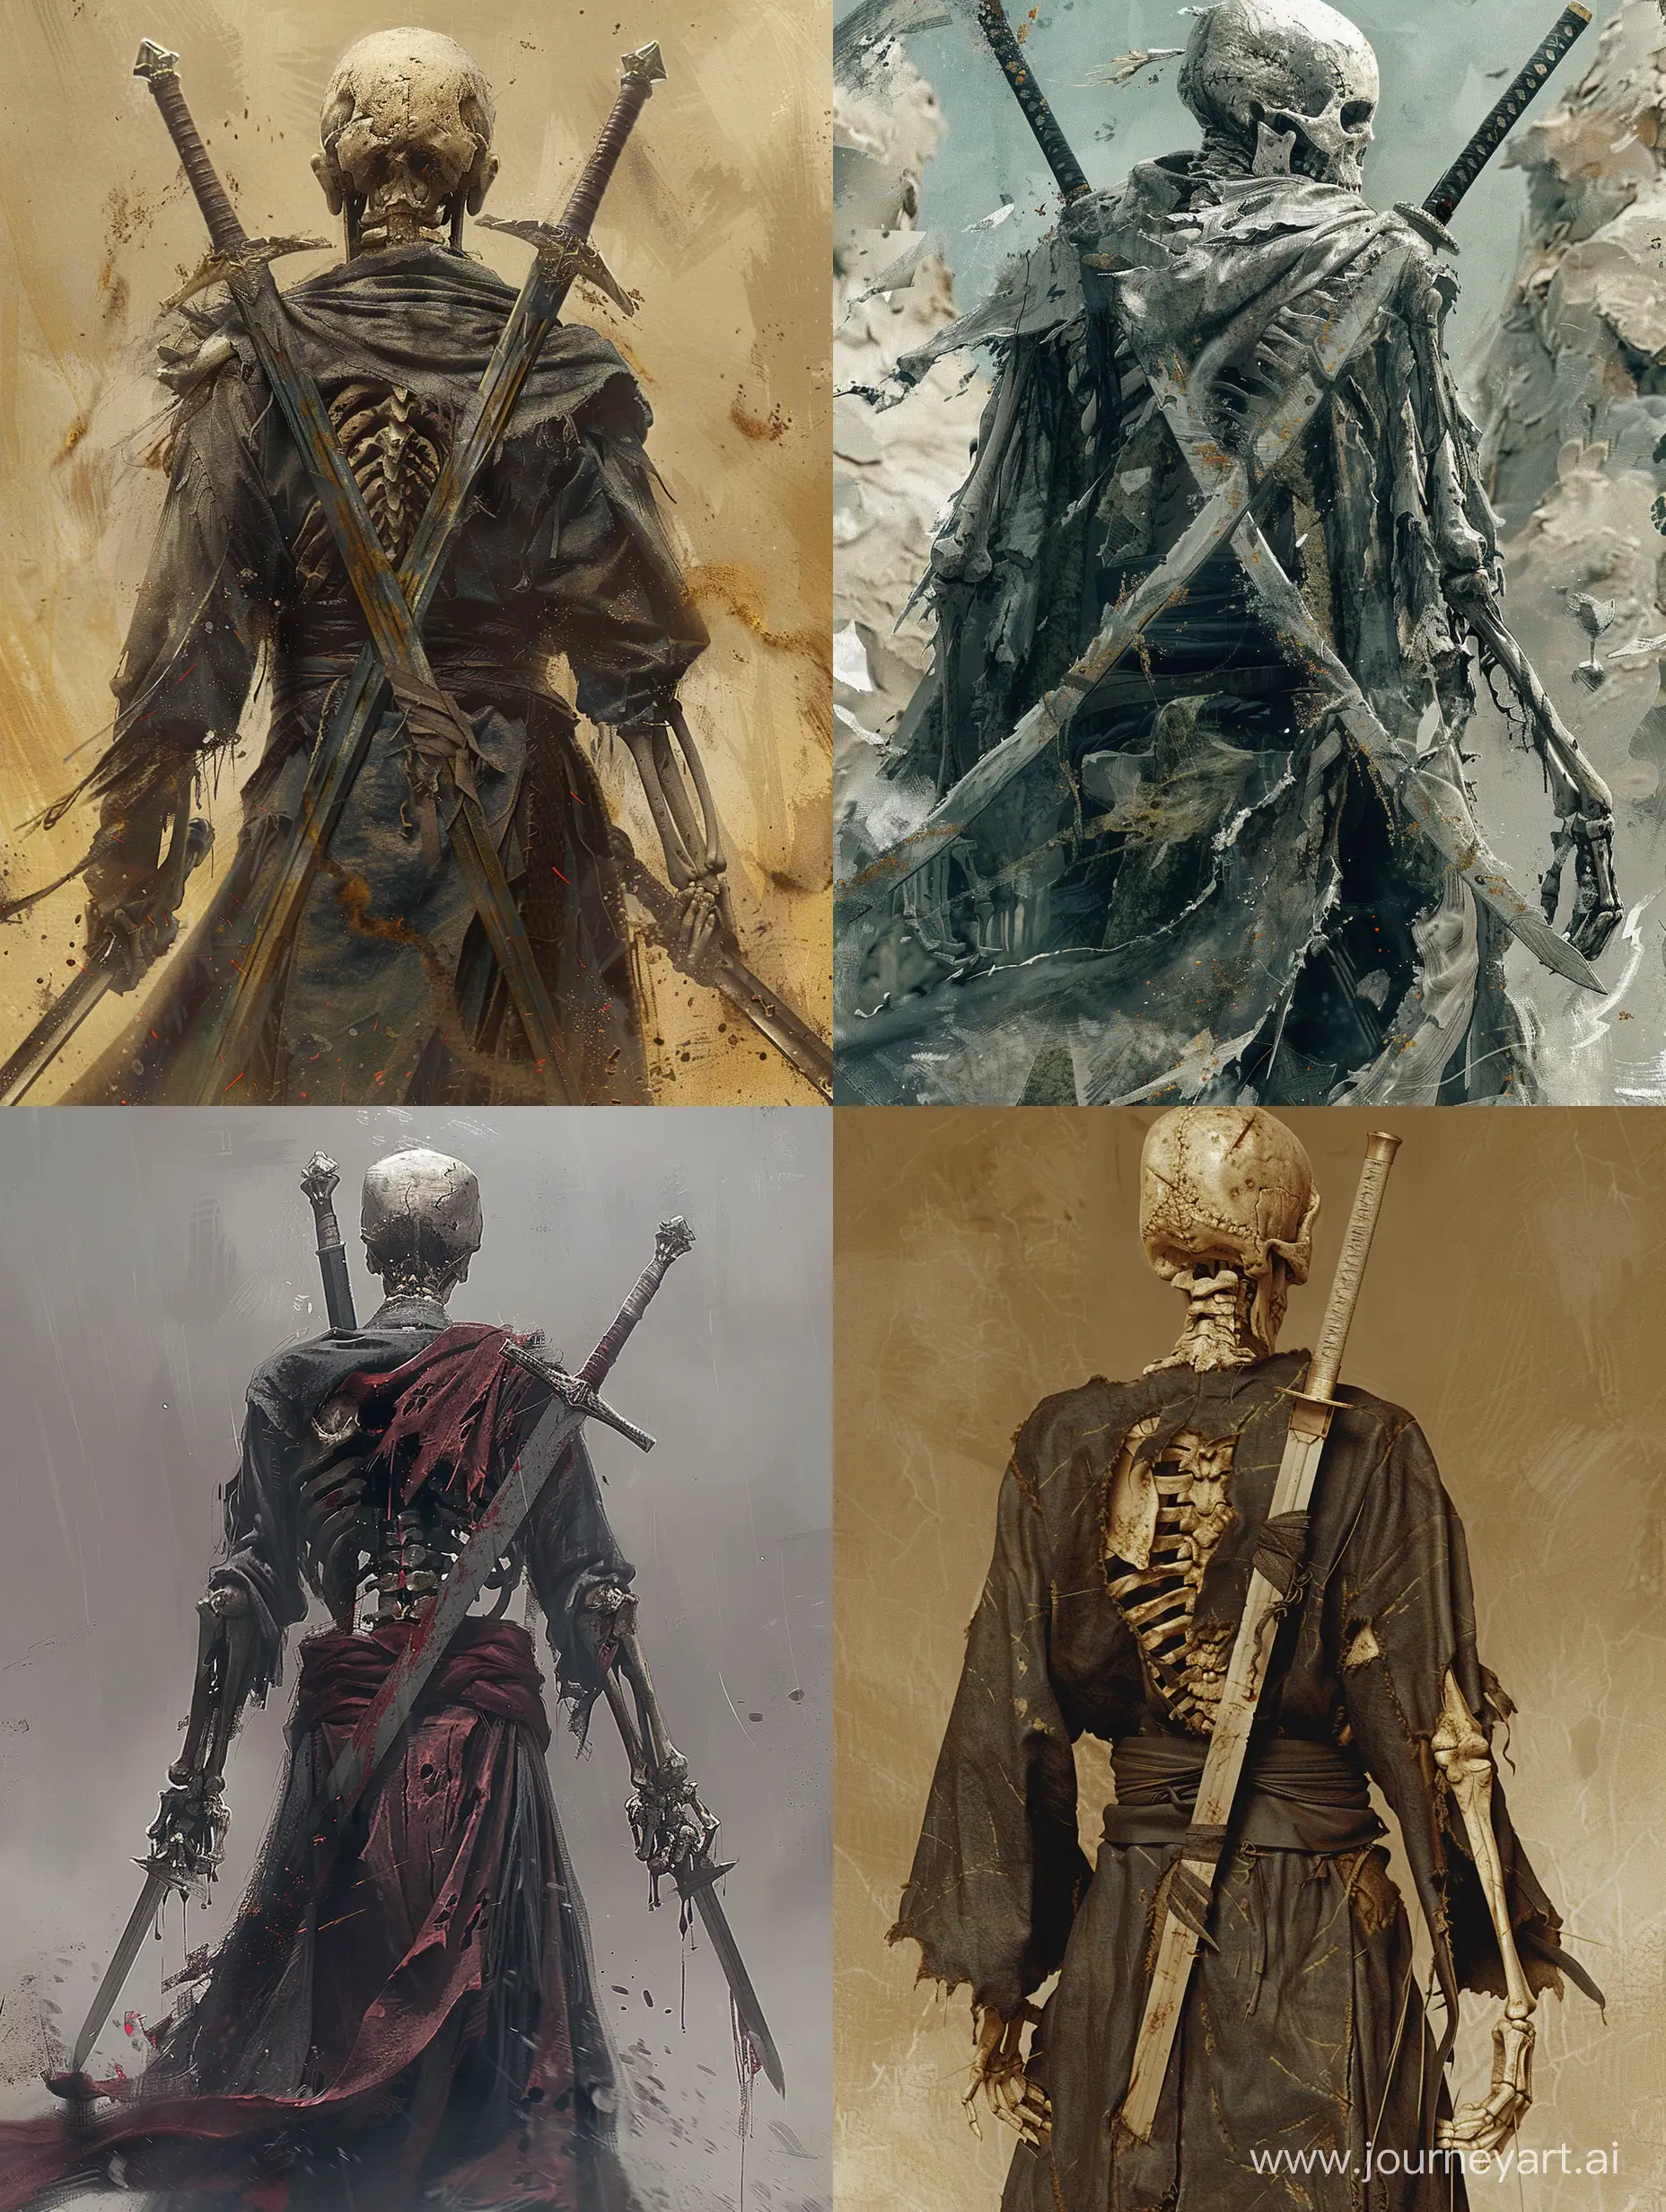 Terrifying-Skeleton-Warrior-with-Torn-Robe-and-Dual-Swords-Detailed-Digital-Fantasy-Art